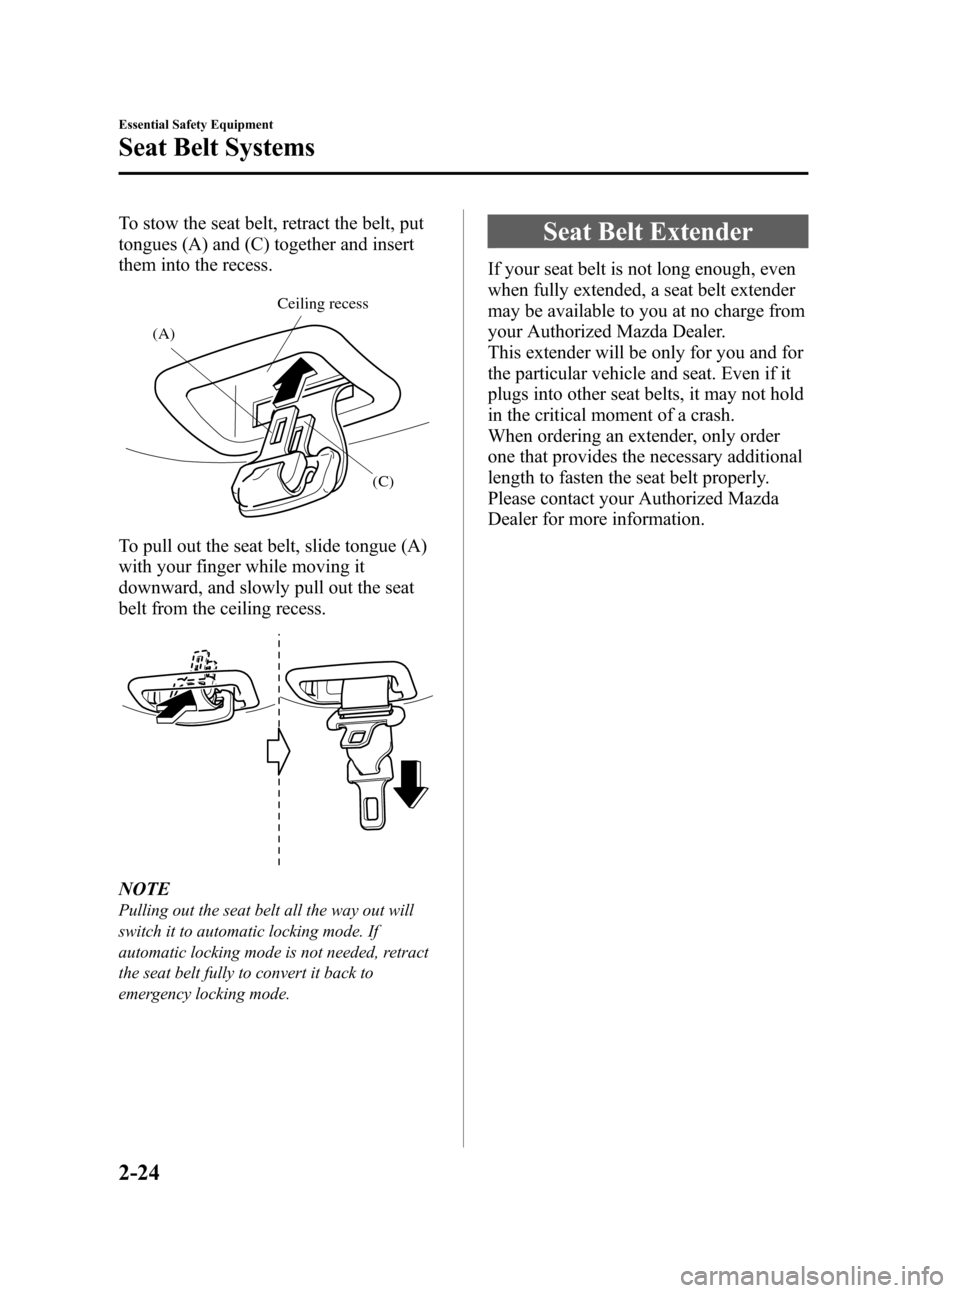 MAZDA MODEL CX-7 2009   (in English) Owners Guide Black plate (36,1)
To stow the seat belt, retract the belt, put
tongues (A) and (C) together and insert
them into the recess.
(A)
(C) Ceiling recess
To pull out the seat belt, slide tongue (A)
with yo